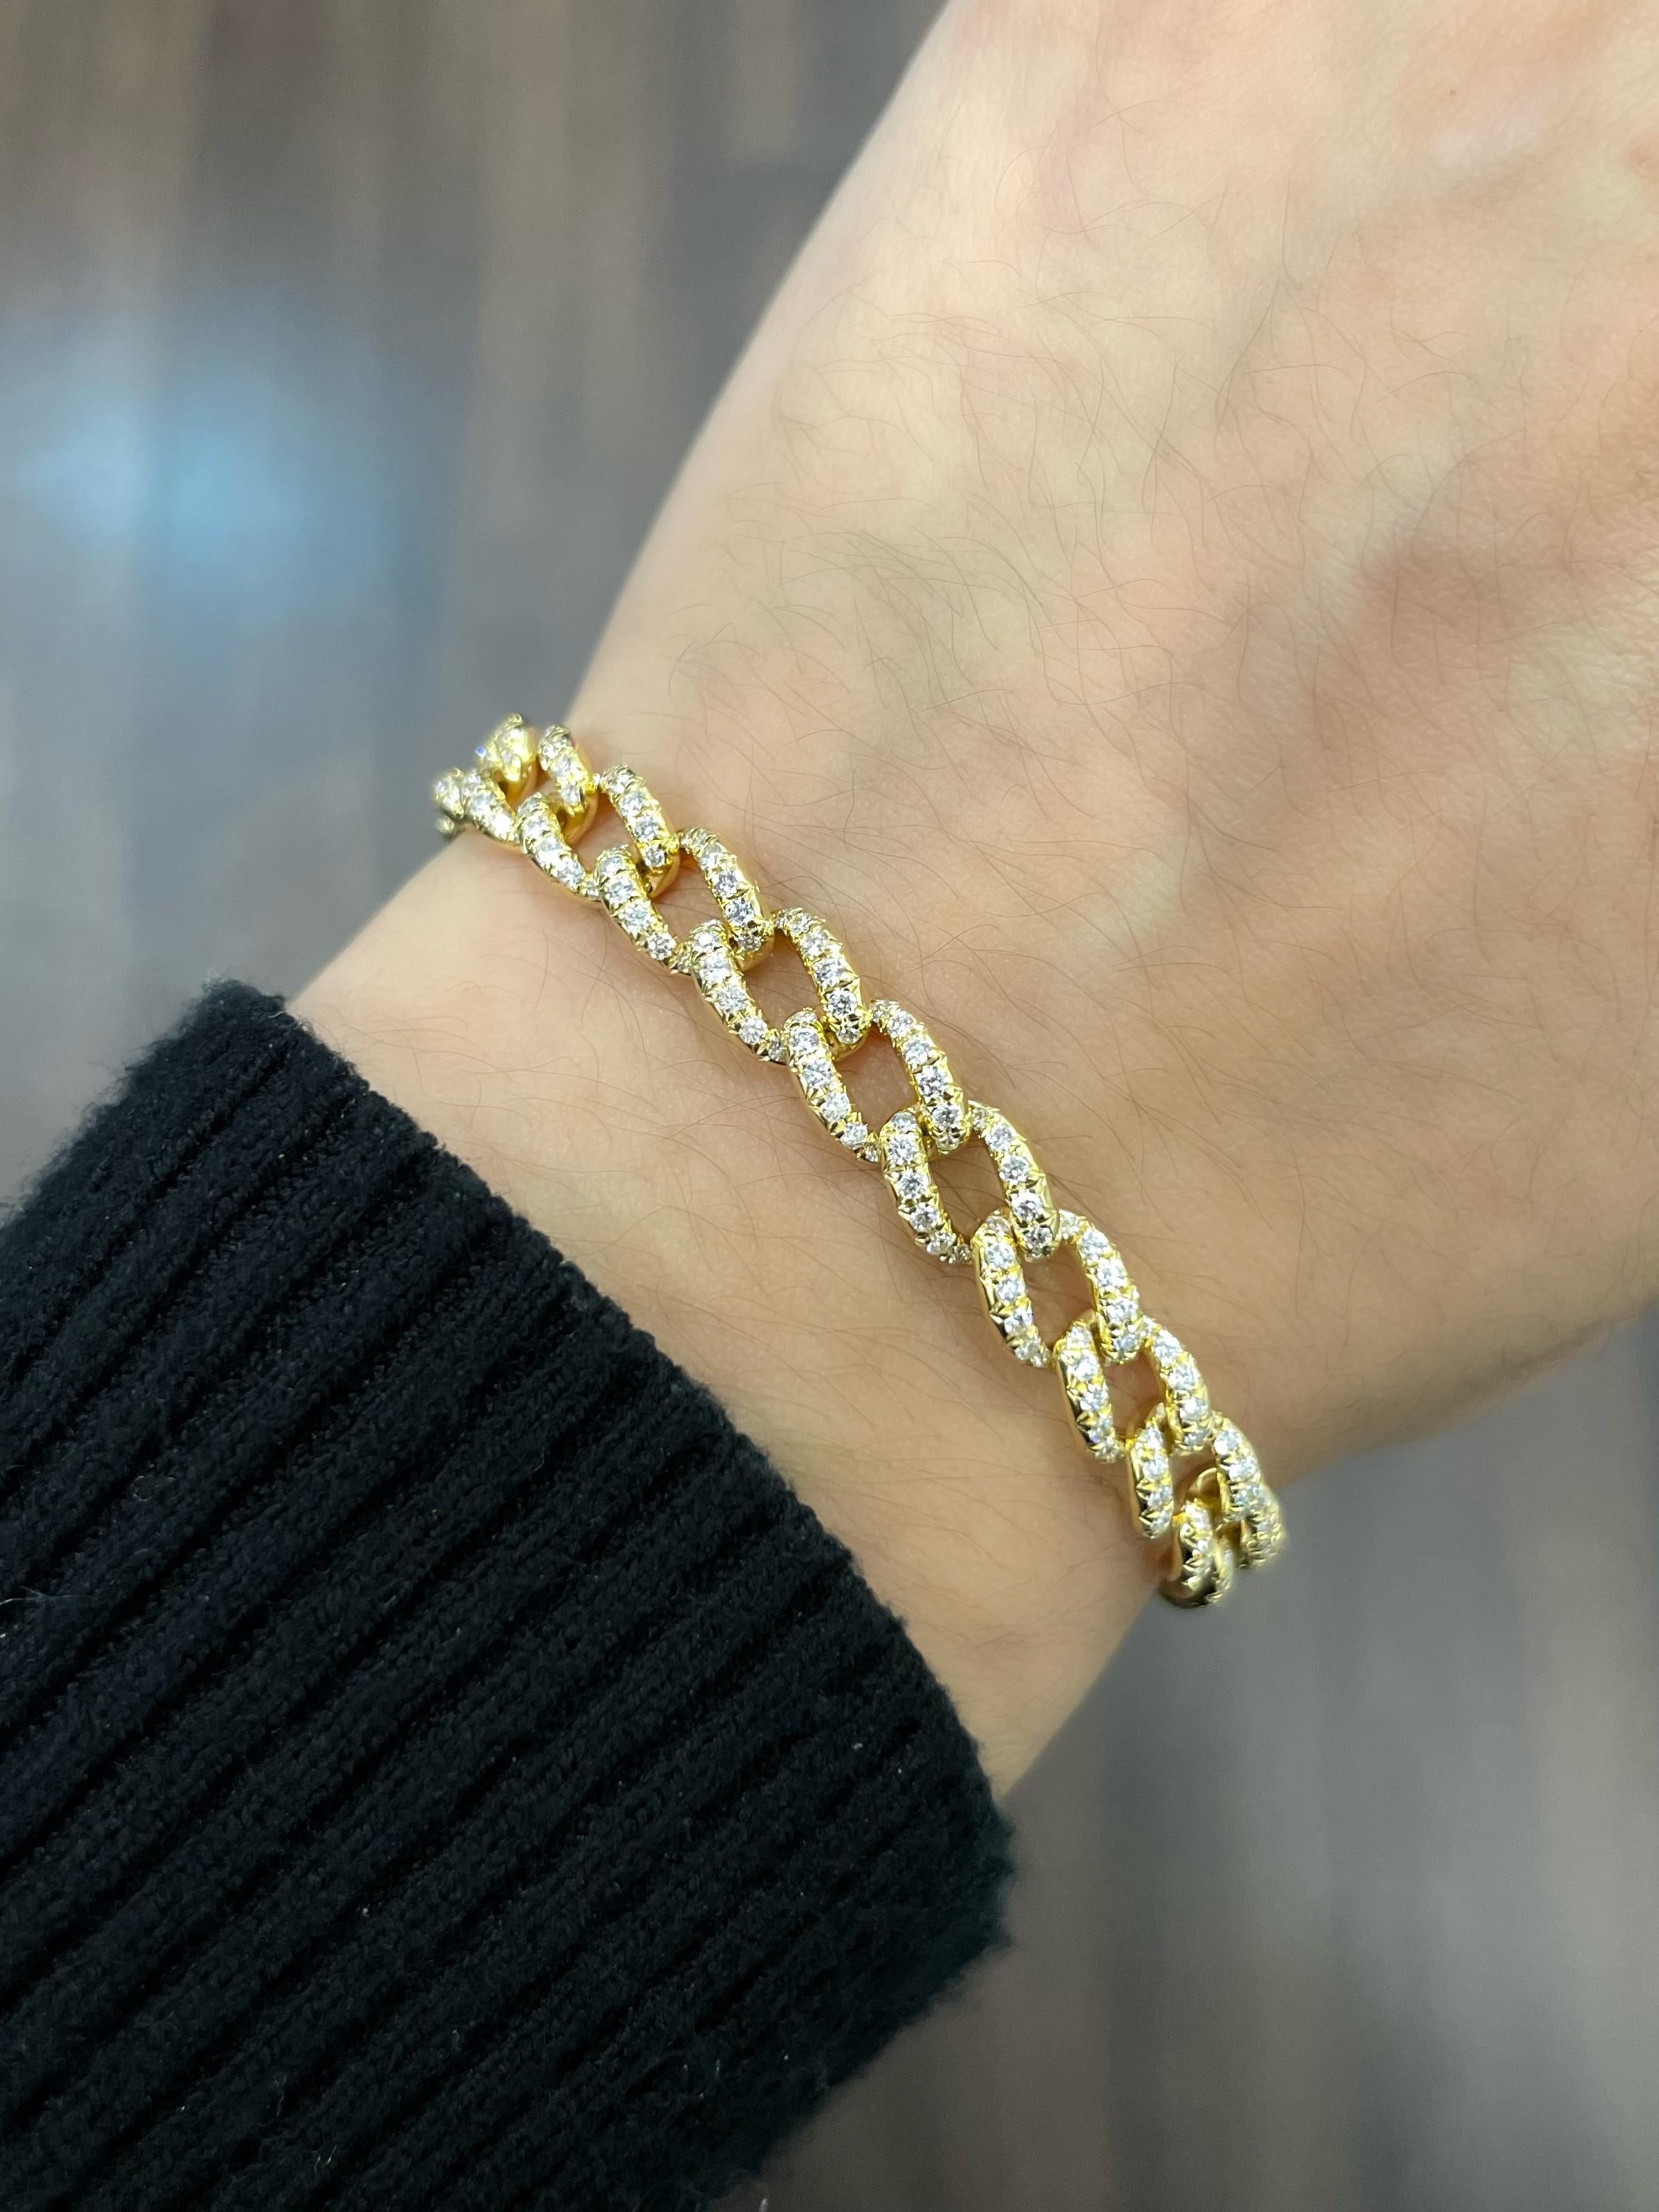 This Cuban link bracelet is set with 2.96 ct diamonds. The diamonds are E/F in color, and VVS1/VVS2 in clarity. The bracelet is available in 18k yellow or 18k rose gold at 7 inches in length. 